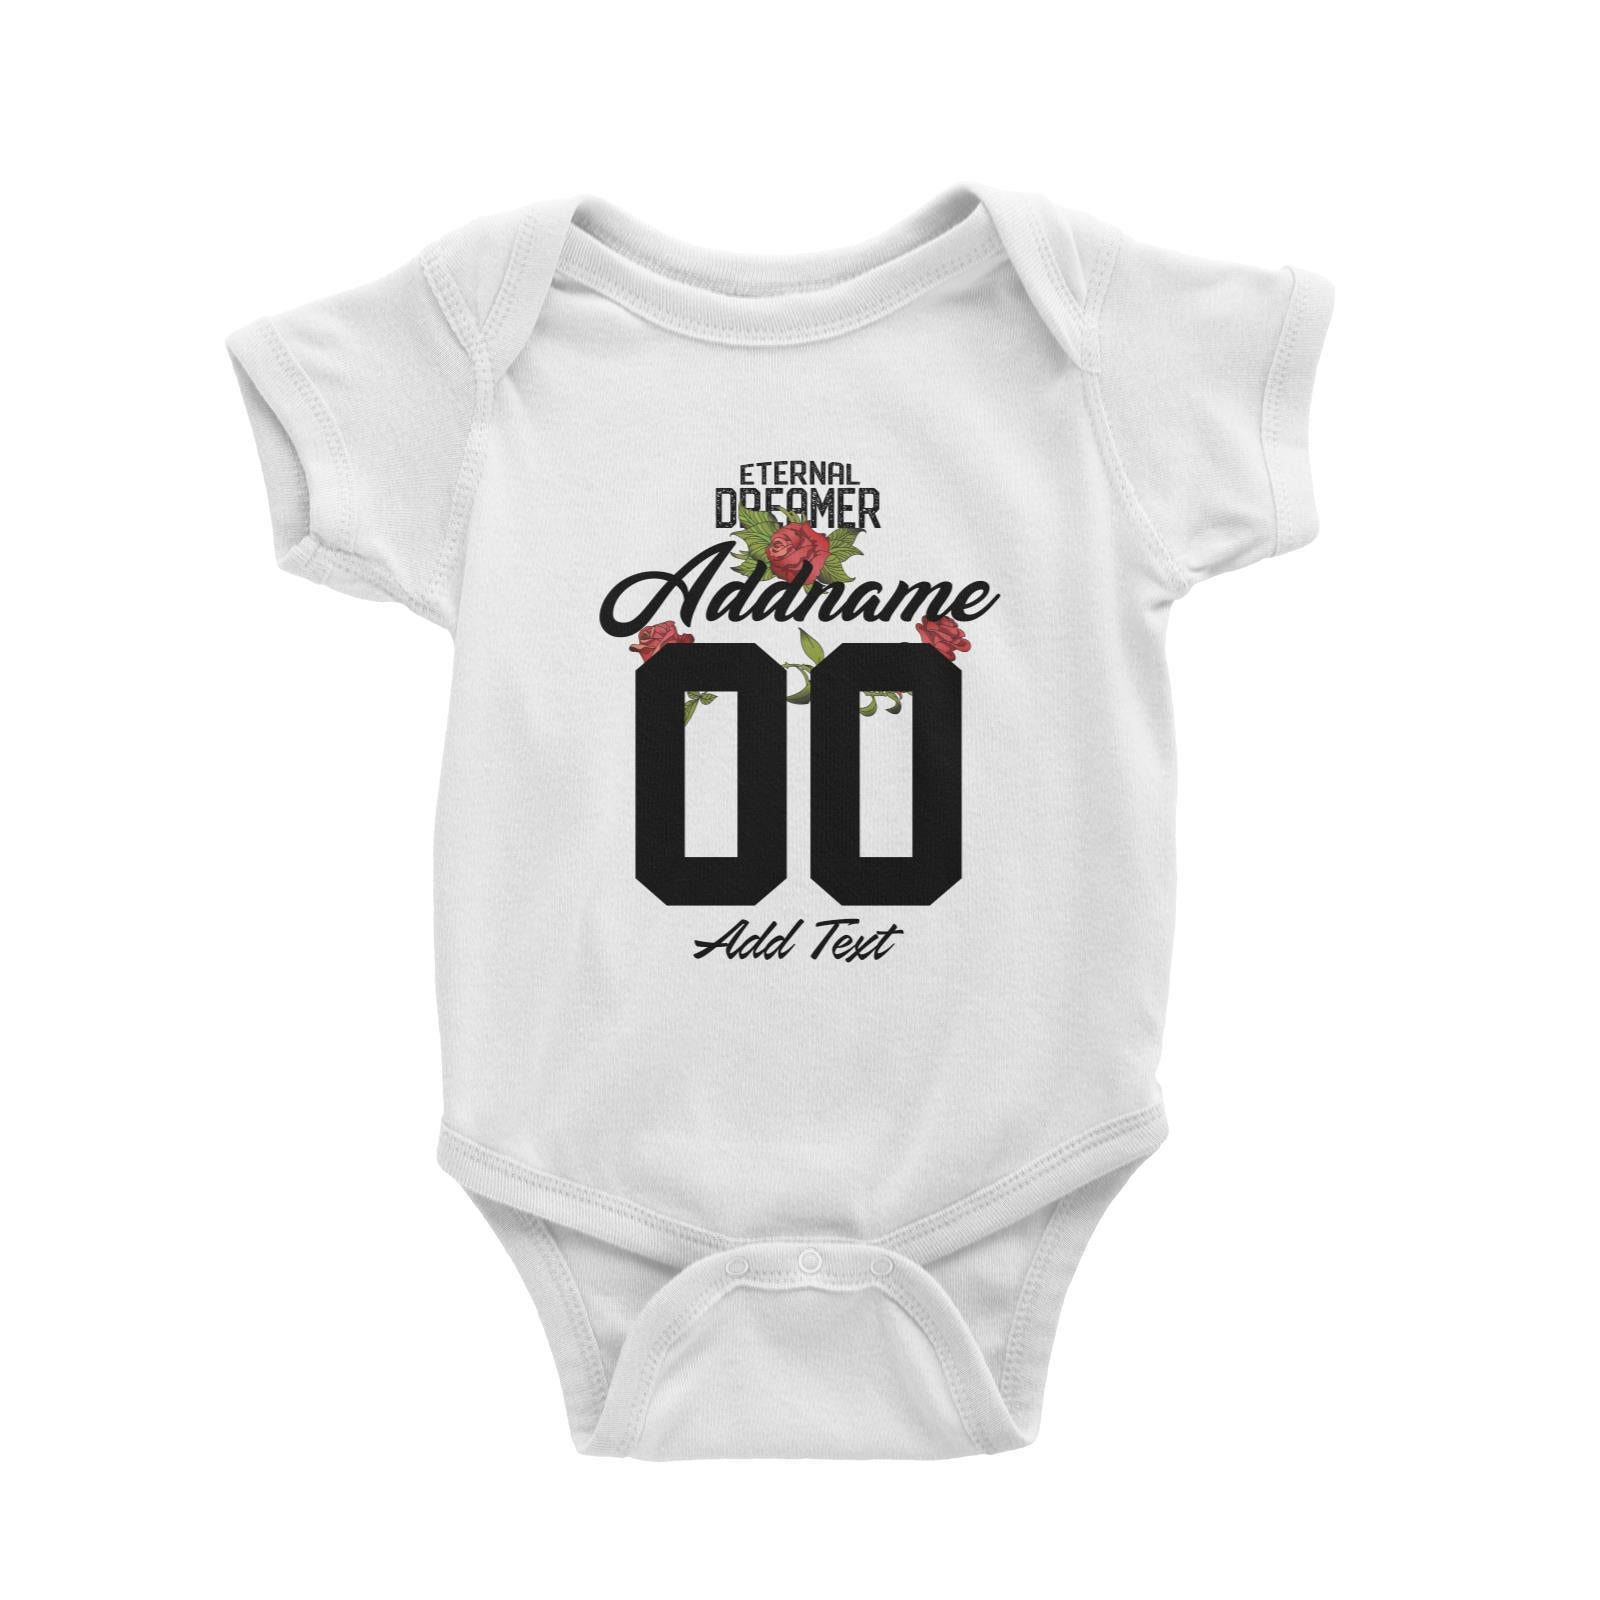 Eternal Dreamer with Roses Personalizable with Name Number and Text Baby Romper